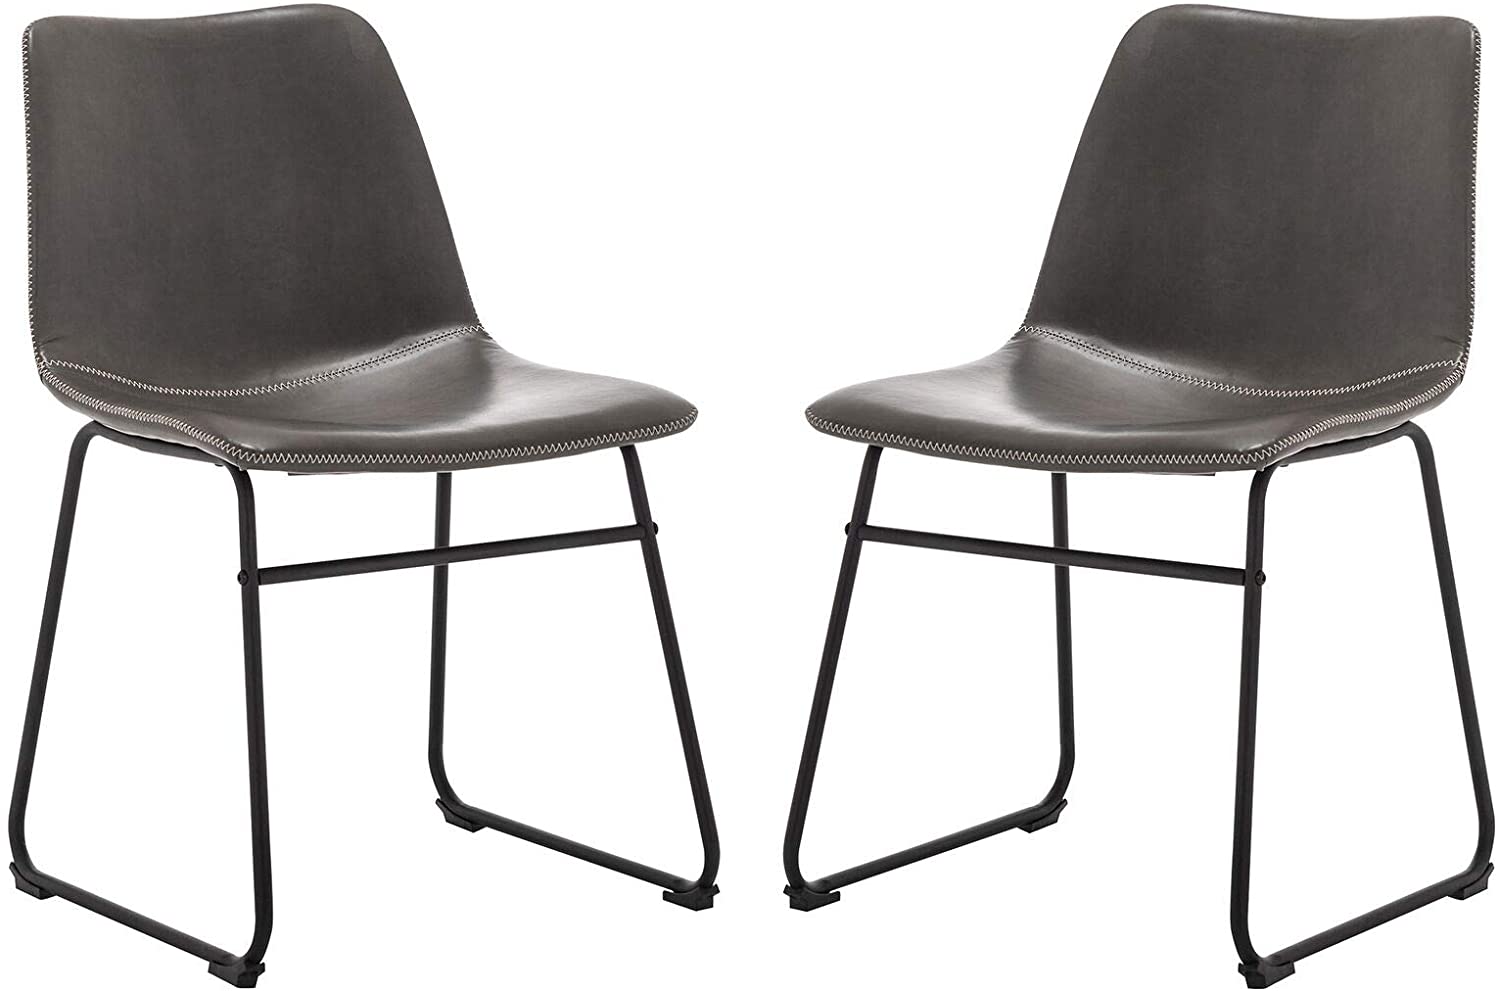 B08JTJMVHD Grey Faux Leather Mid-Century Modern Dining Chairs Set of 2 for Kitchen and Dining Room, Home Minimalism Side Chair with Metal Legs, Accent Furniture